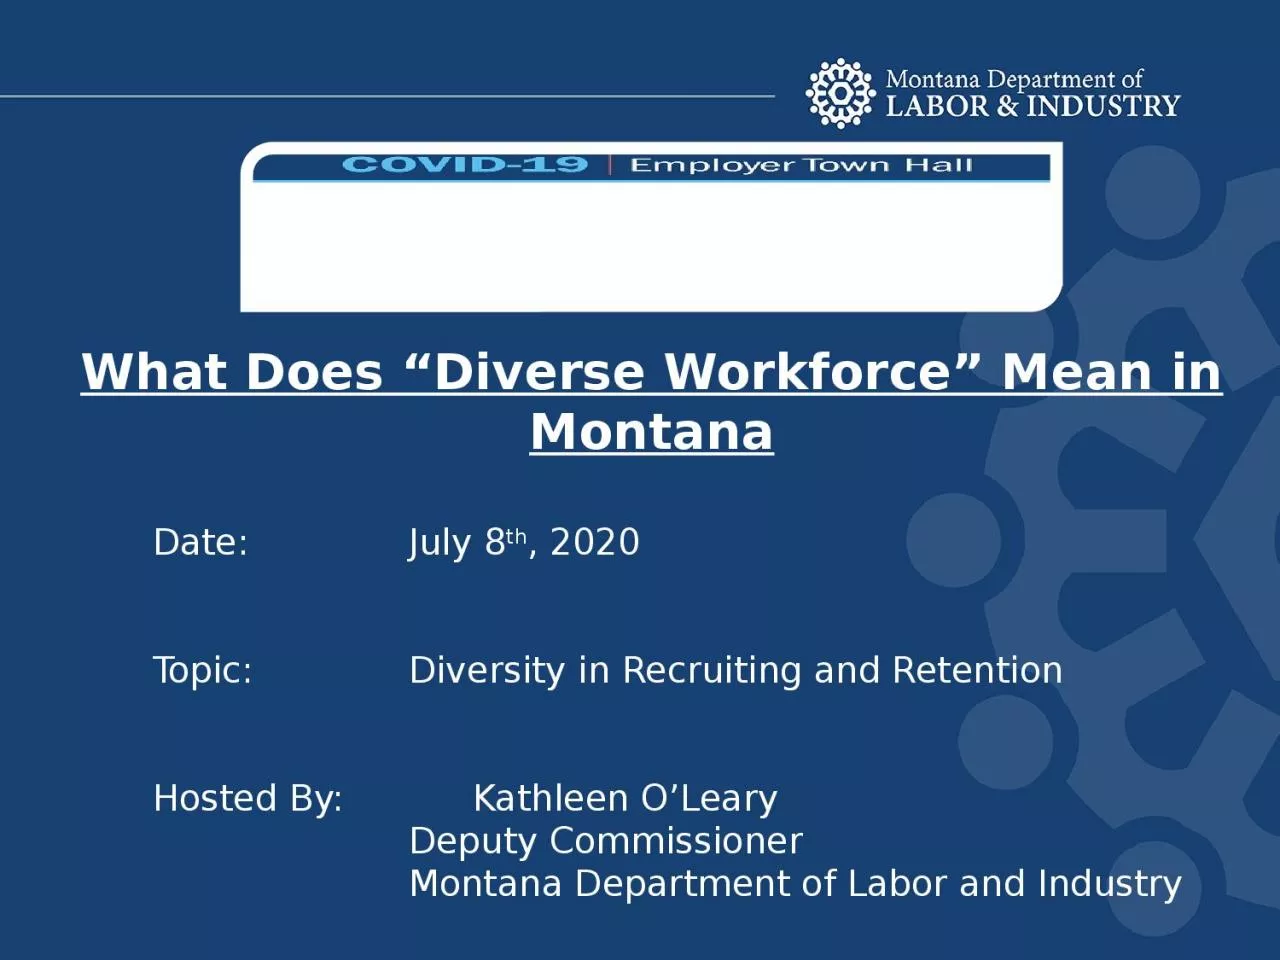 What Does “Diverse Workforce” Mean in Montana